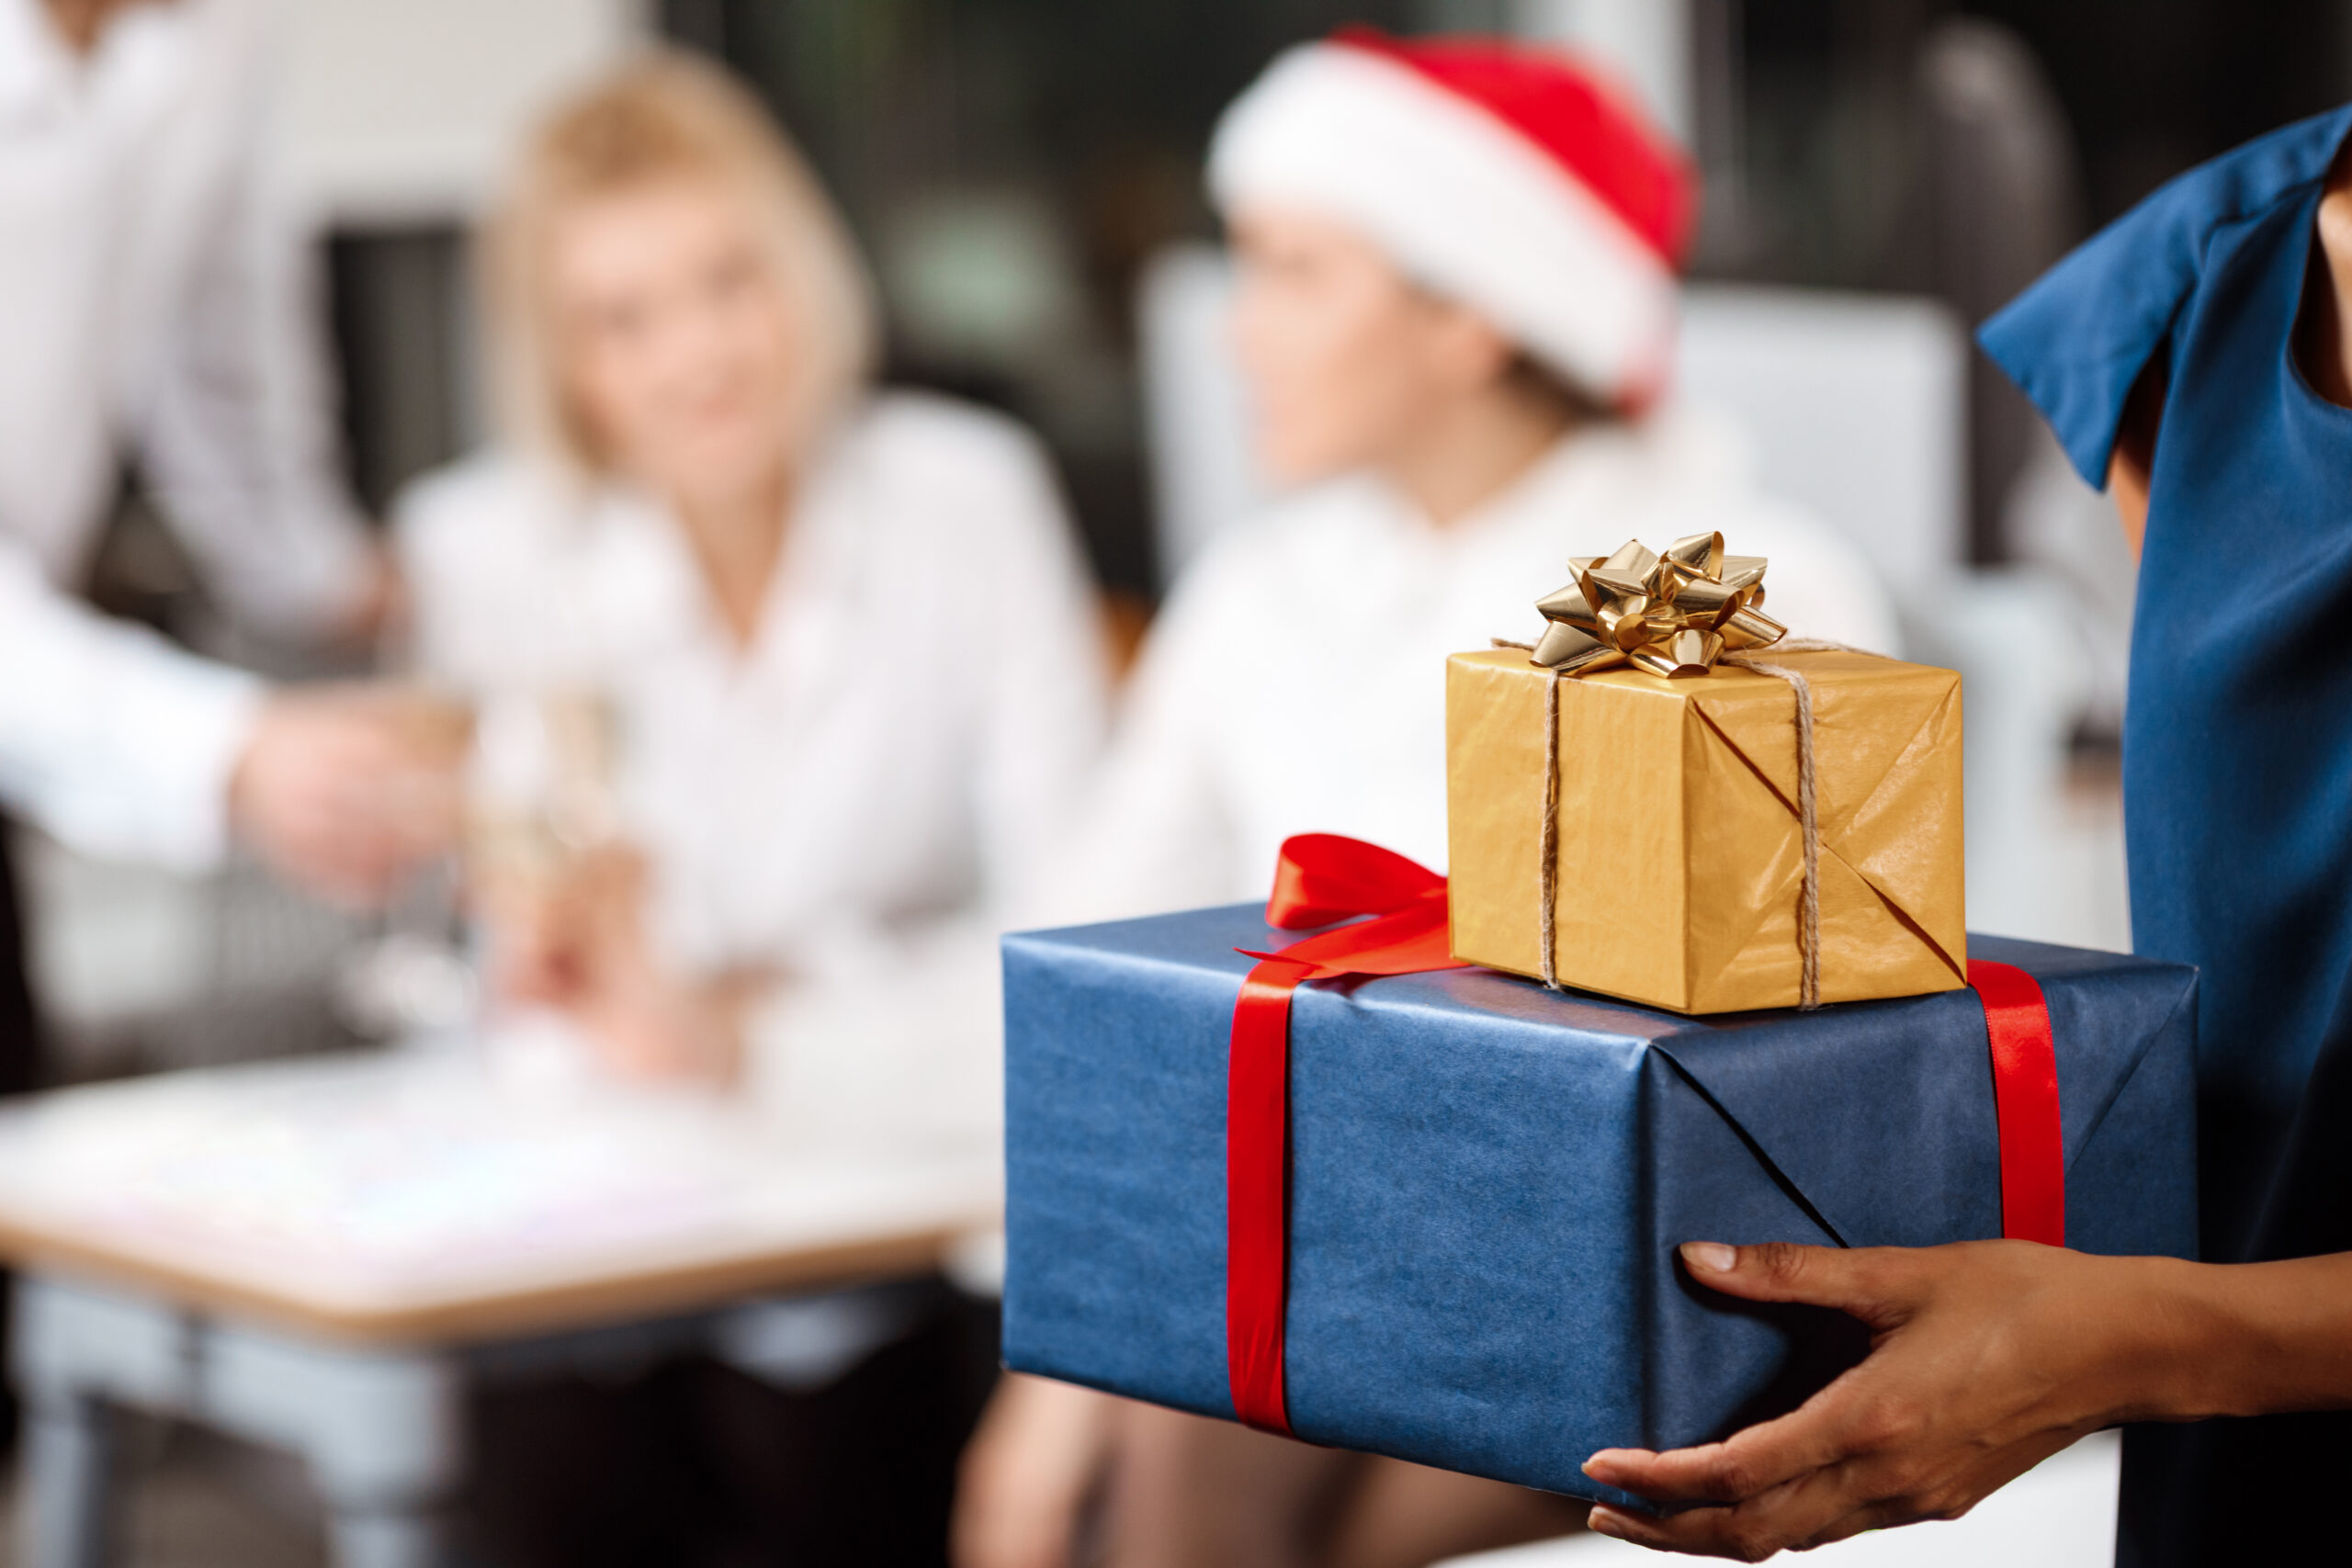 The Ultimate Secret Santa Gift Guide for Every Budget